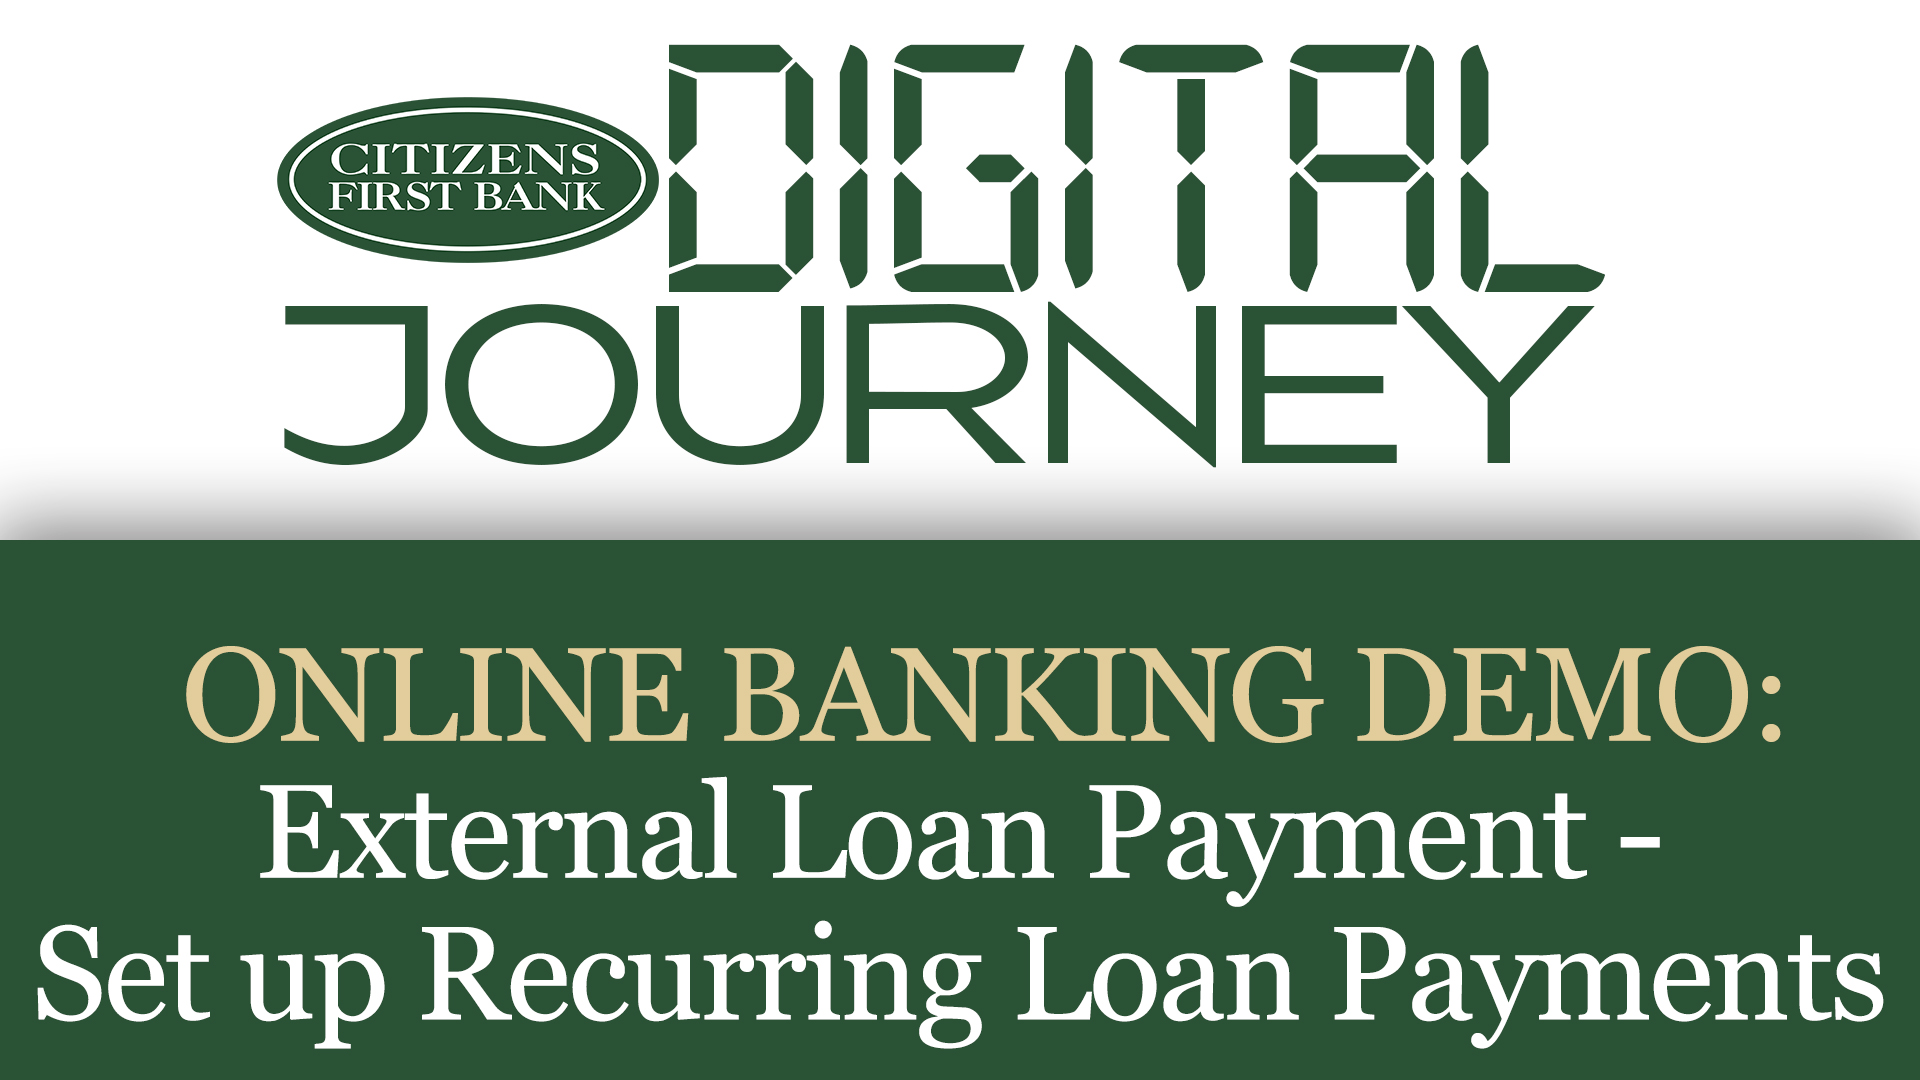 Digital Journey logo with our online banking demo: External Loan Payment - Set up Recurring Loan Payments